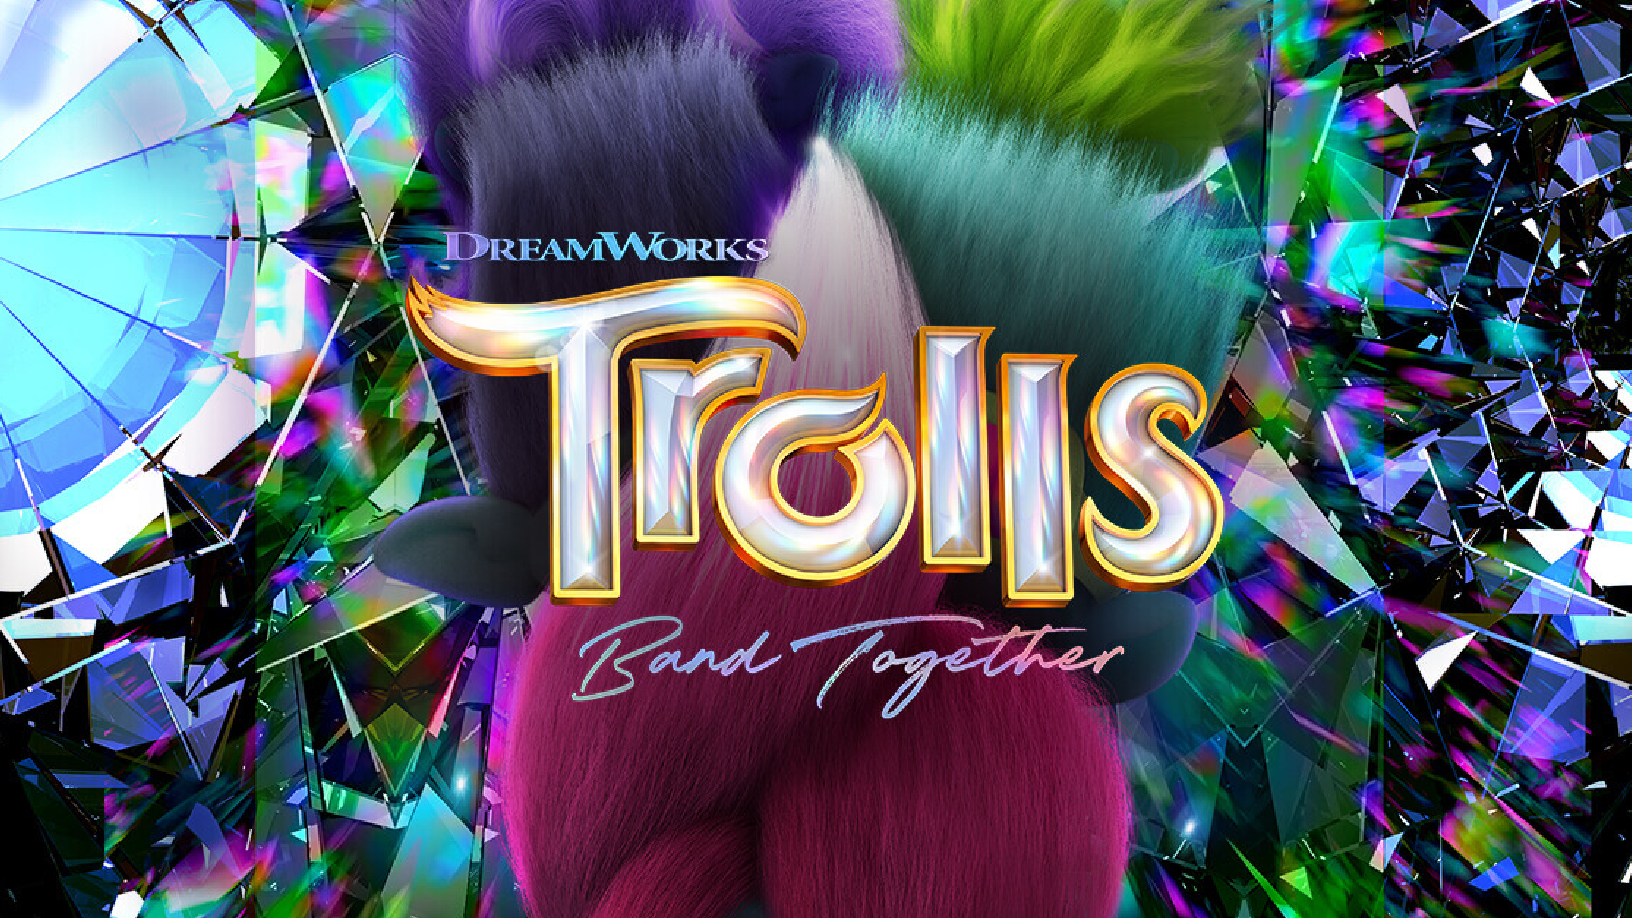 Mattel Announces Collaboration With Trolls Ahead of Film Release